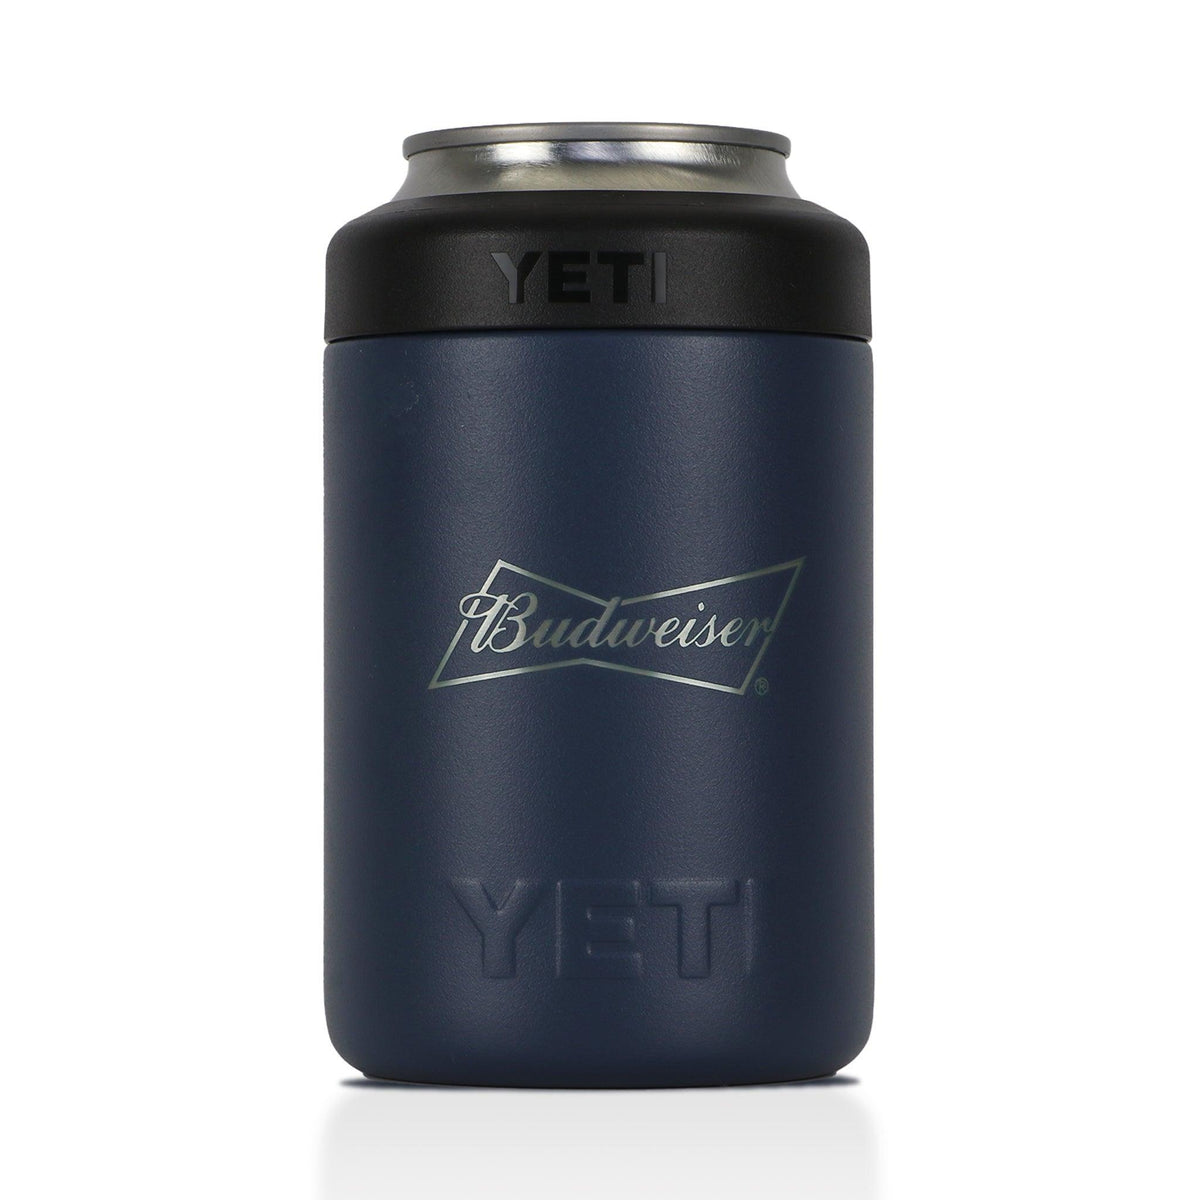 https://www.shopbeergears.shop/wp-content/uploads/1692/92/looking-for-a-budweiser-yeti-12oz-can-colster-budweiser-to-buy-get-it-now-before-they-are-gone_0.jpg